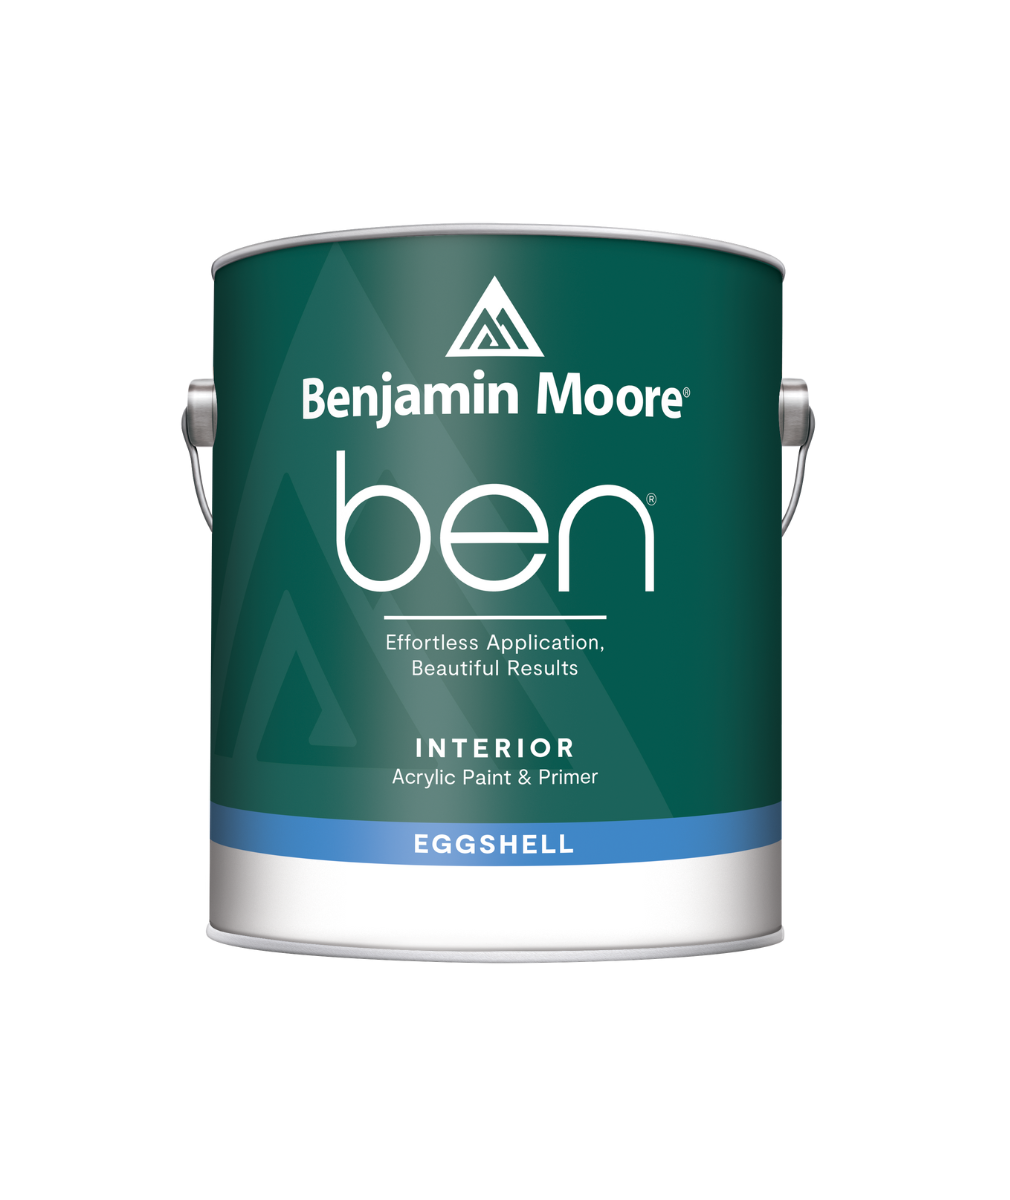 Benjamin Moore ben eggshell Interior Paint, available at Johnson Paint & Maine Paint in MA, NH & ME.